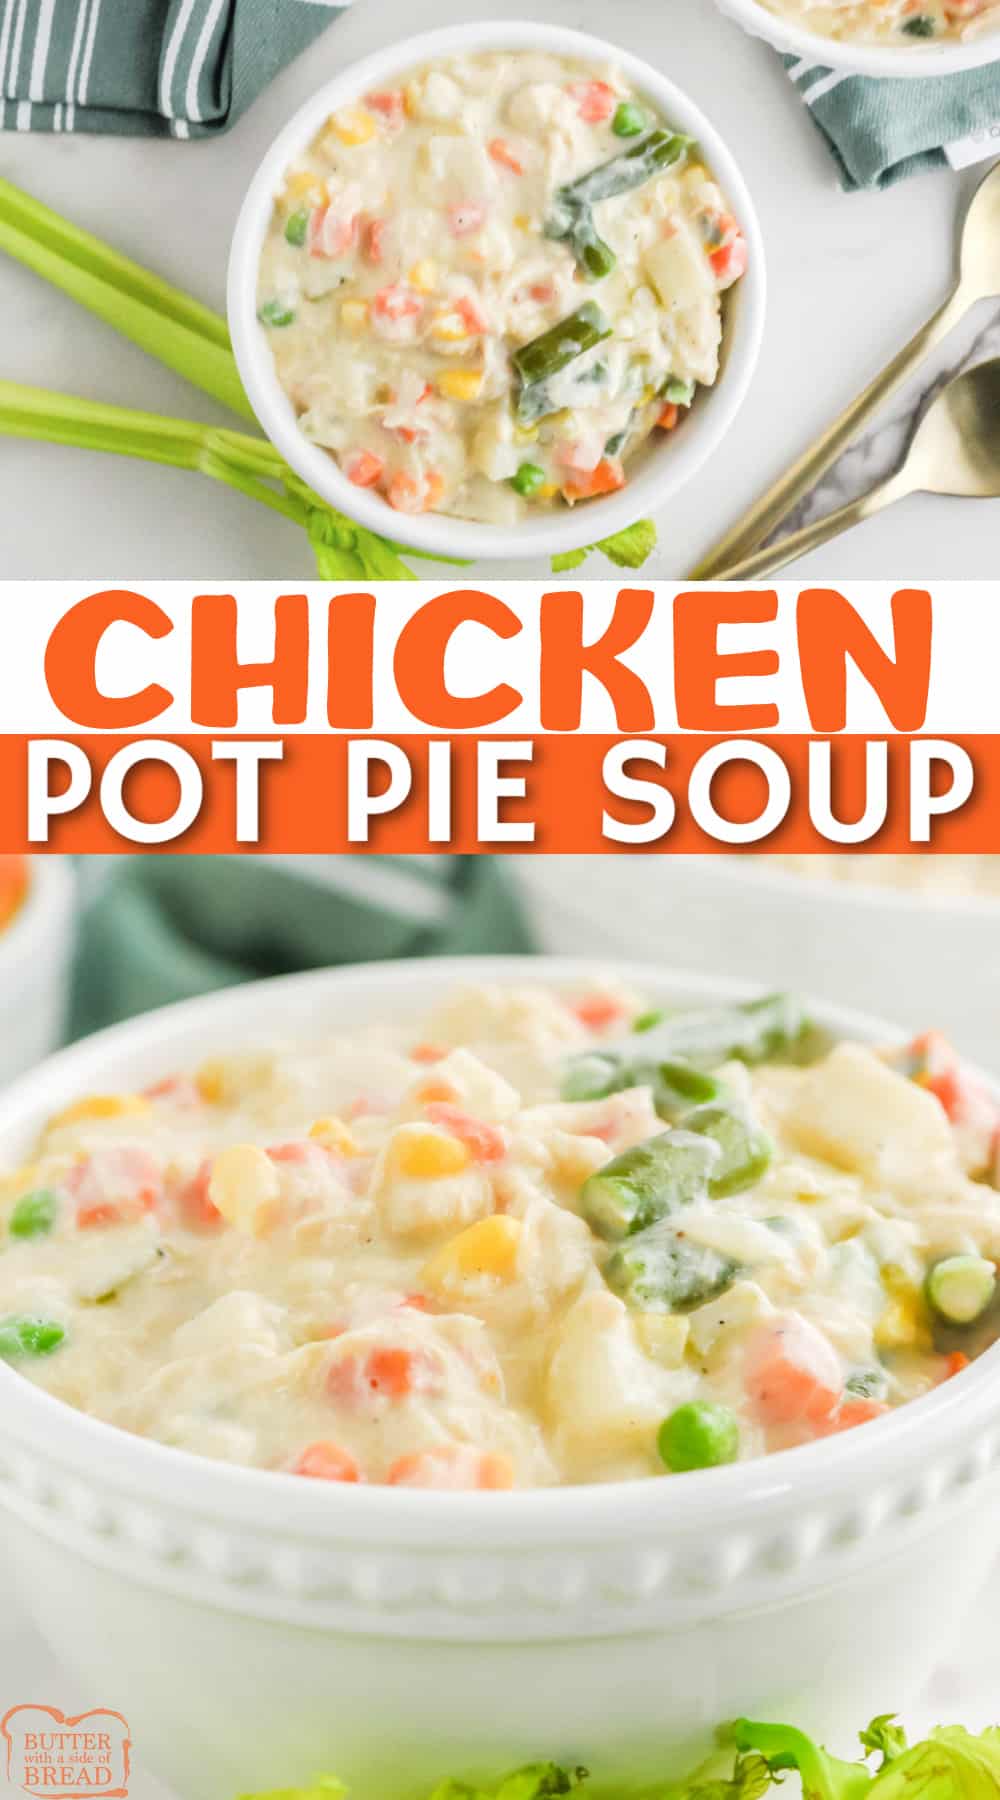 Chicken Pot Pie Soup is comfort food that is ready in less than 30 minutes! Easy soup recipe that is flavorful, creamy and full of vegetables and chicken. 